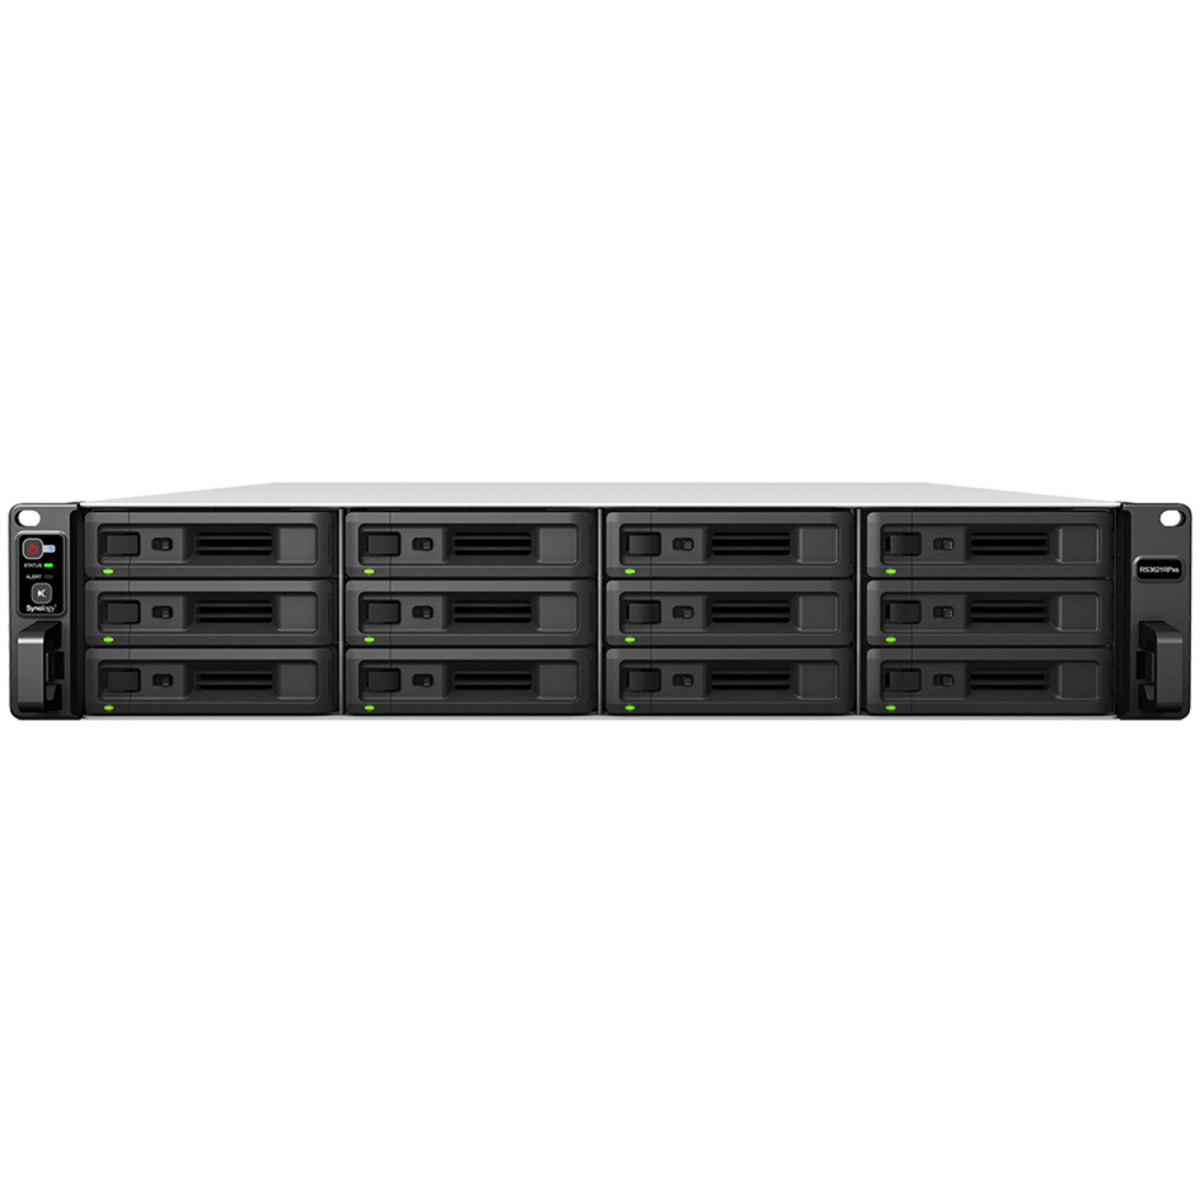 buy $7308 Synology RackStation RS3621RPxs 24tb RackMount NAS - Network Attached Storage Device 12x2000gb Western Digital Red SA500 WDS200T1R0A 2.5 SATA 6Gb/s SSD NAS Class Drives Installed - Burn-In Tested - nas headquarters buy network attached storage server device das new raid-5 free shipping usa RackStation RS3621RPxs